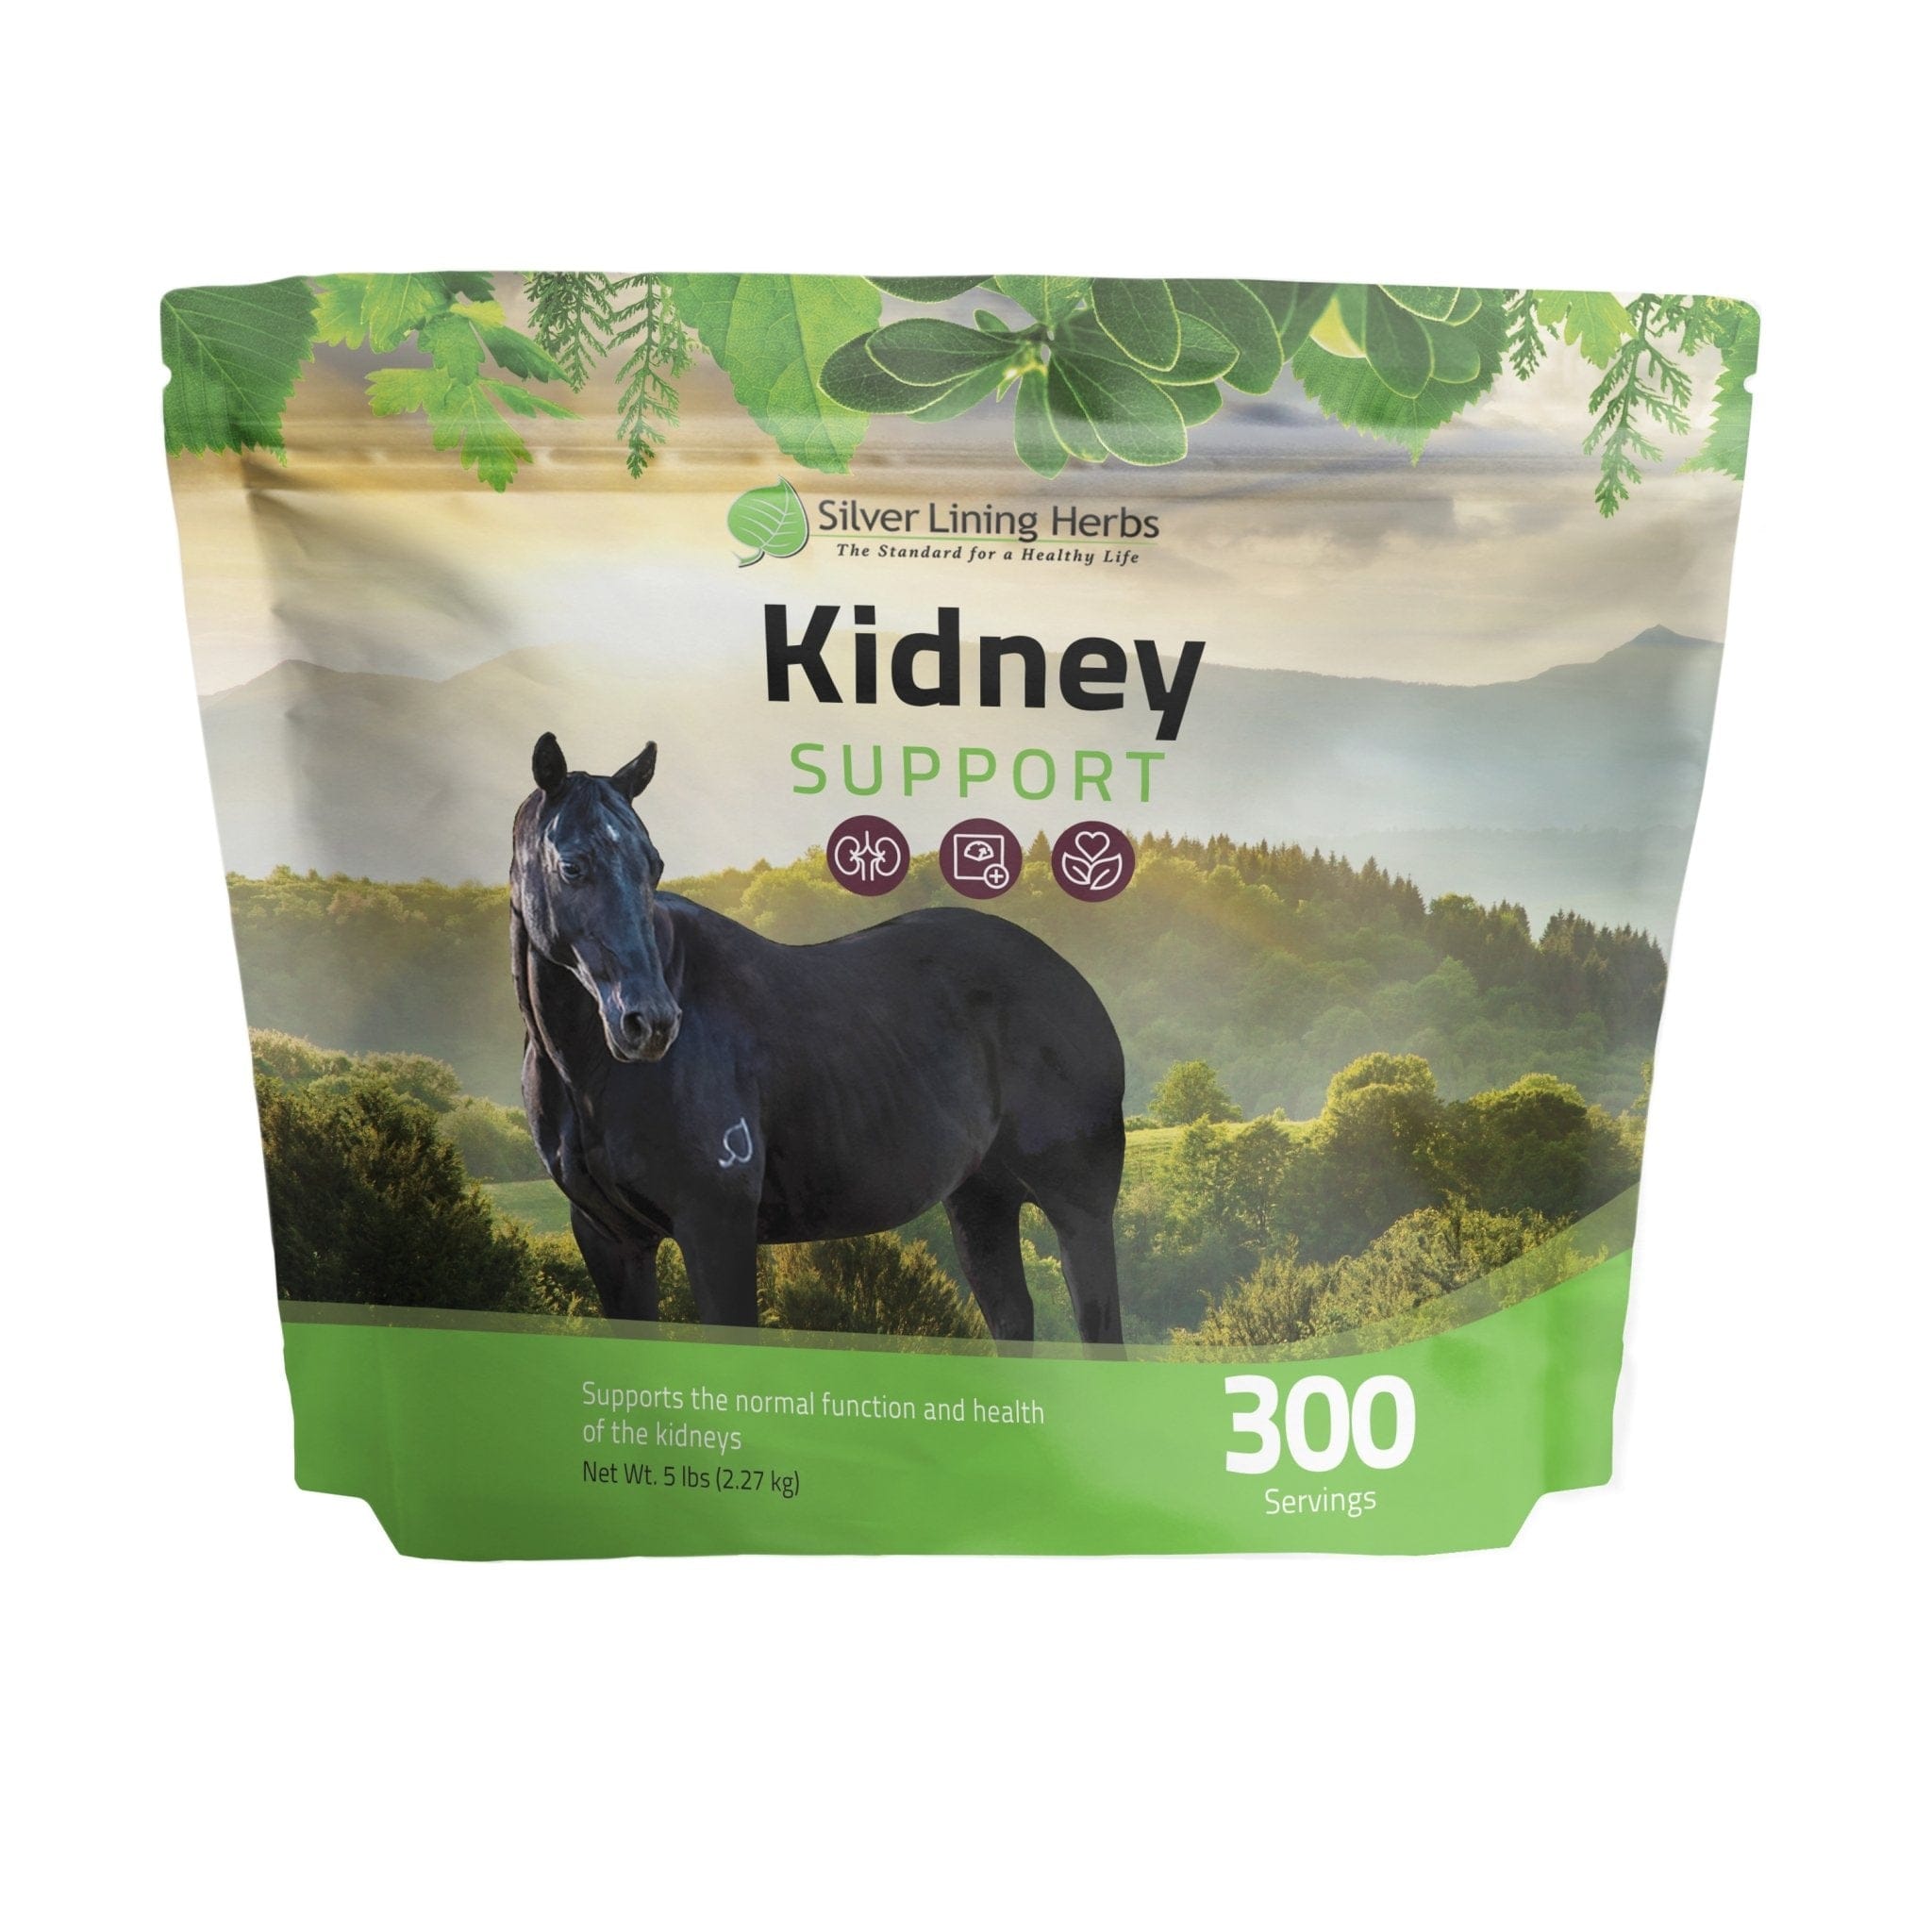 Kidney Support for Horses - Silver Lining Herbs